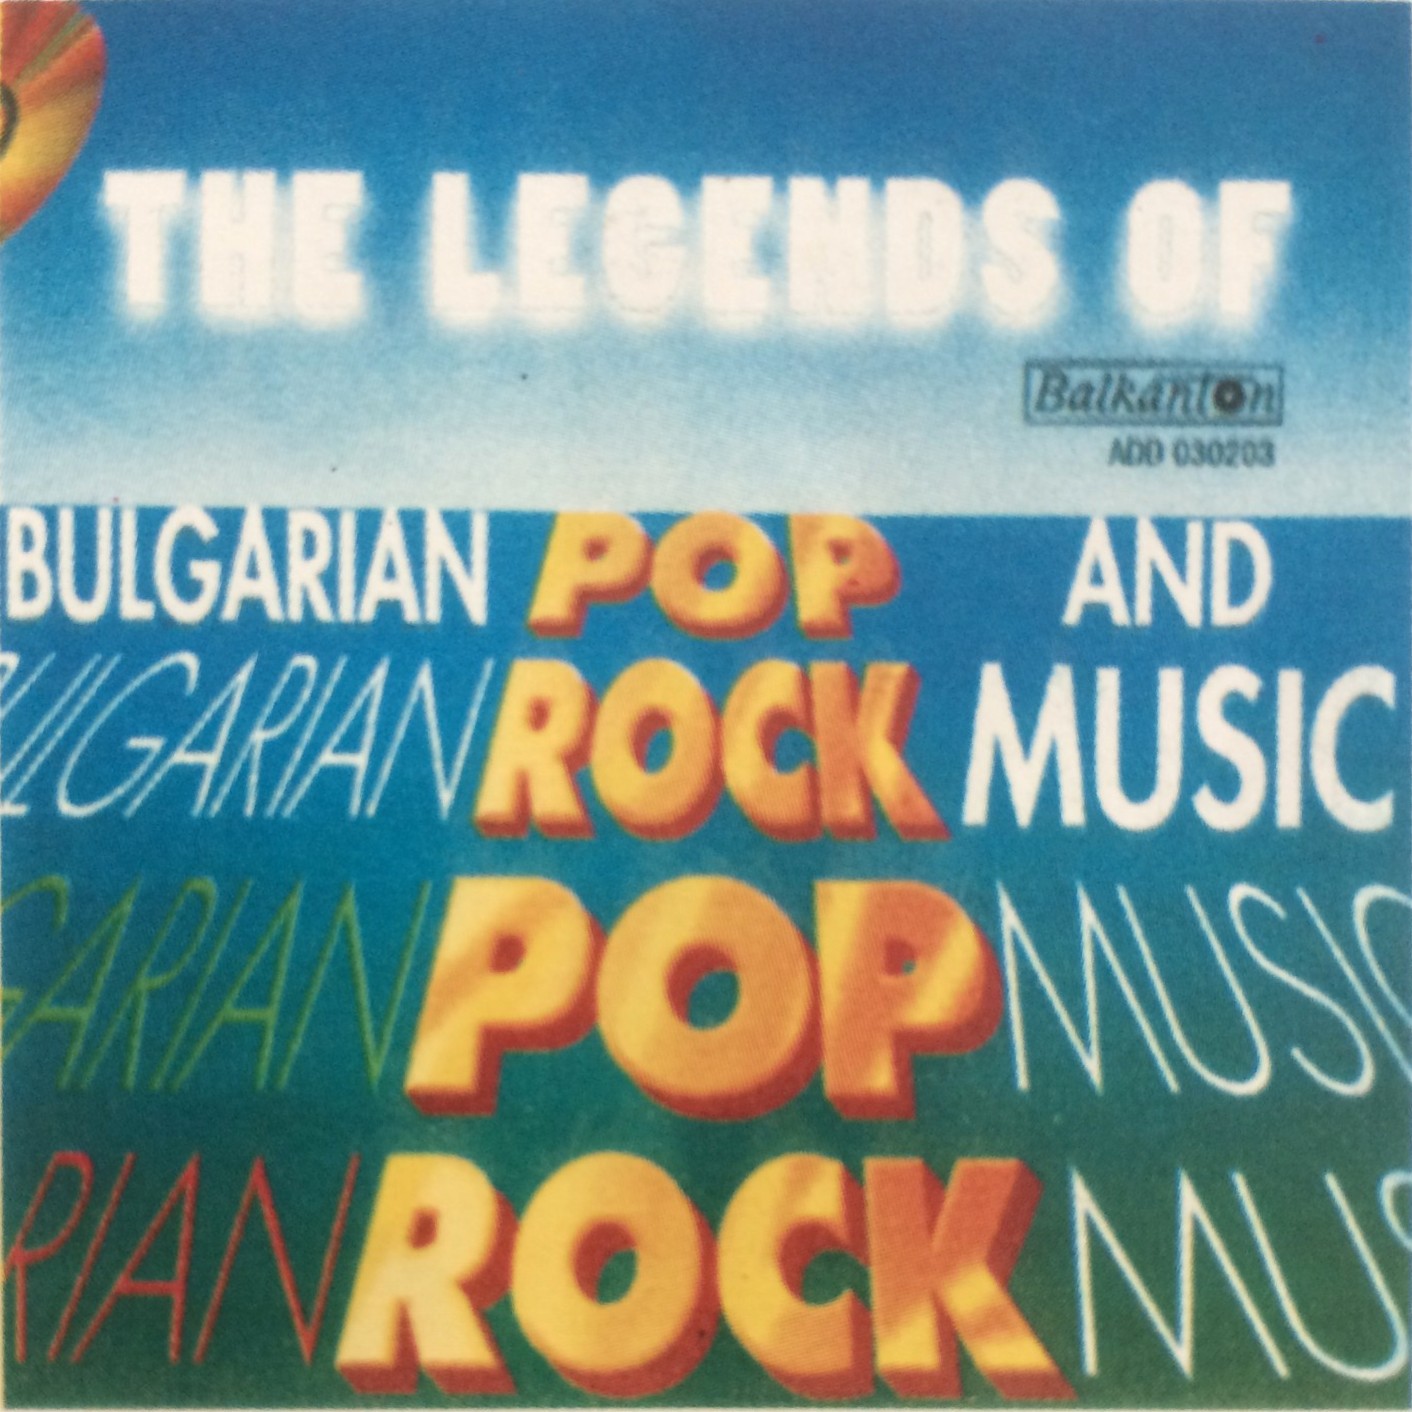 The legends of bulgarian pop and rock music